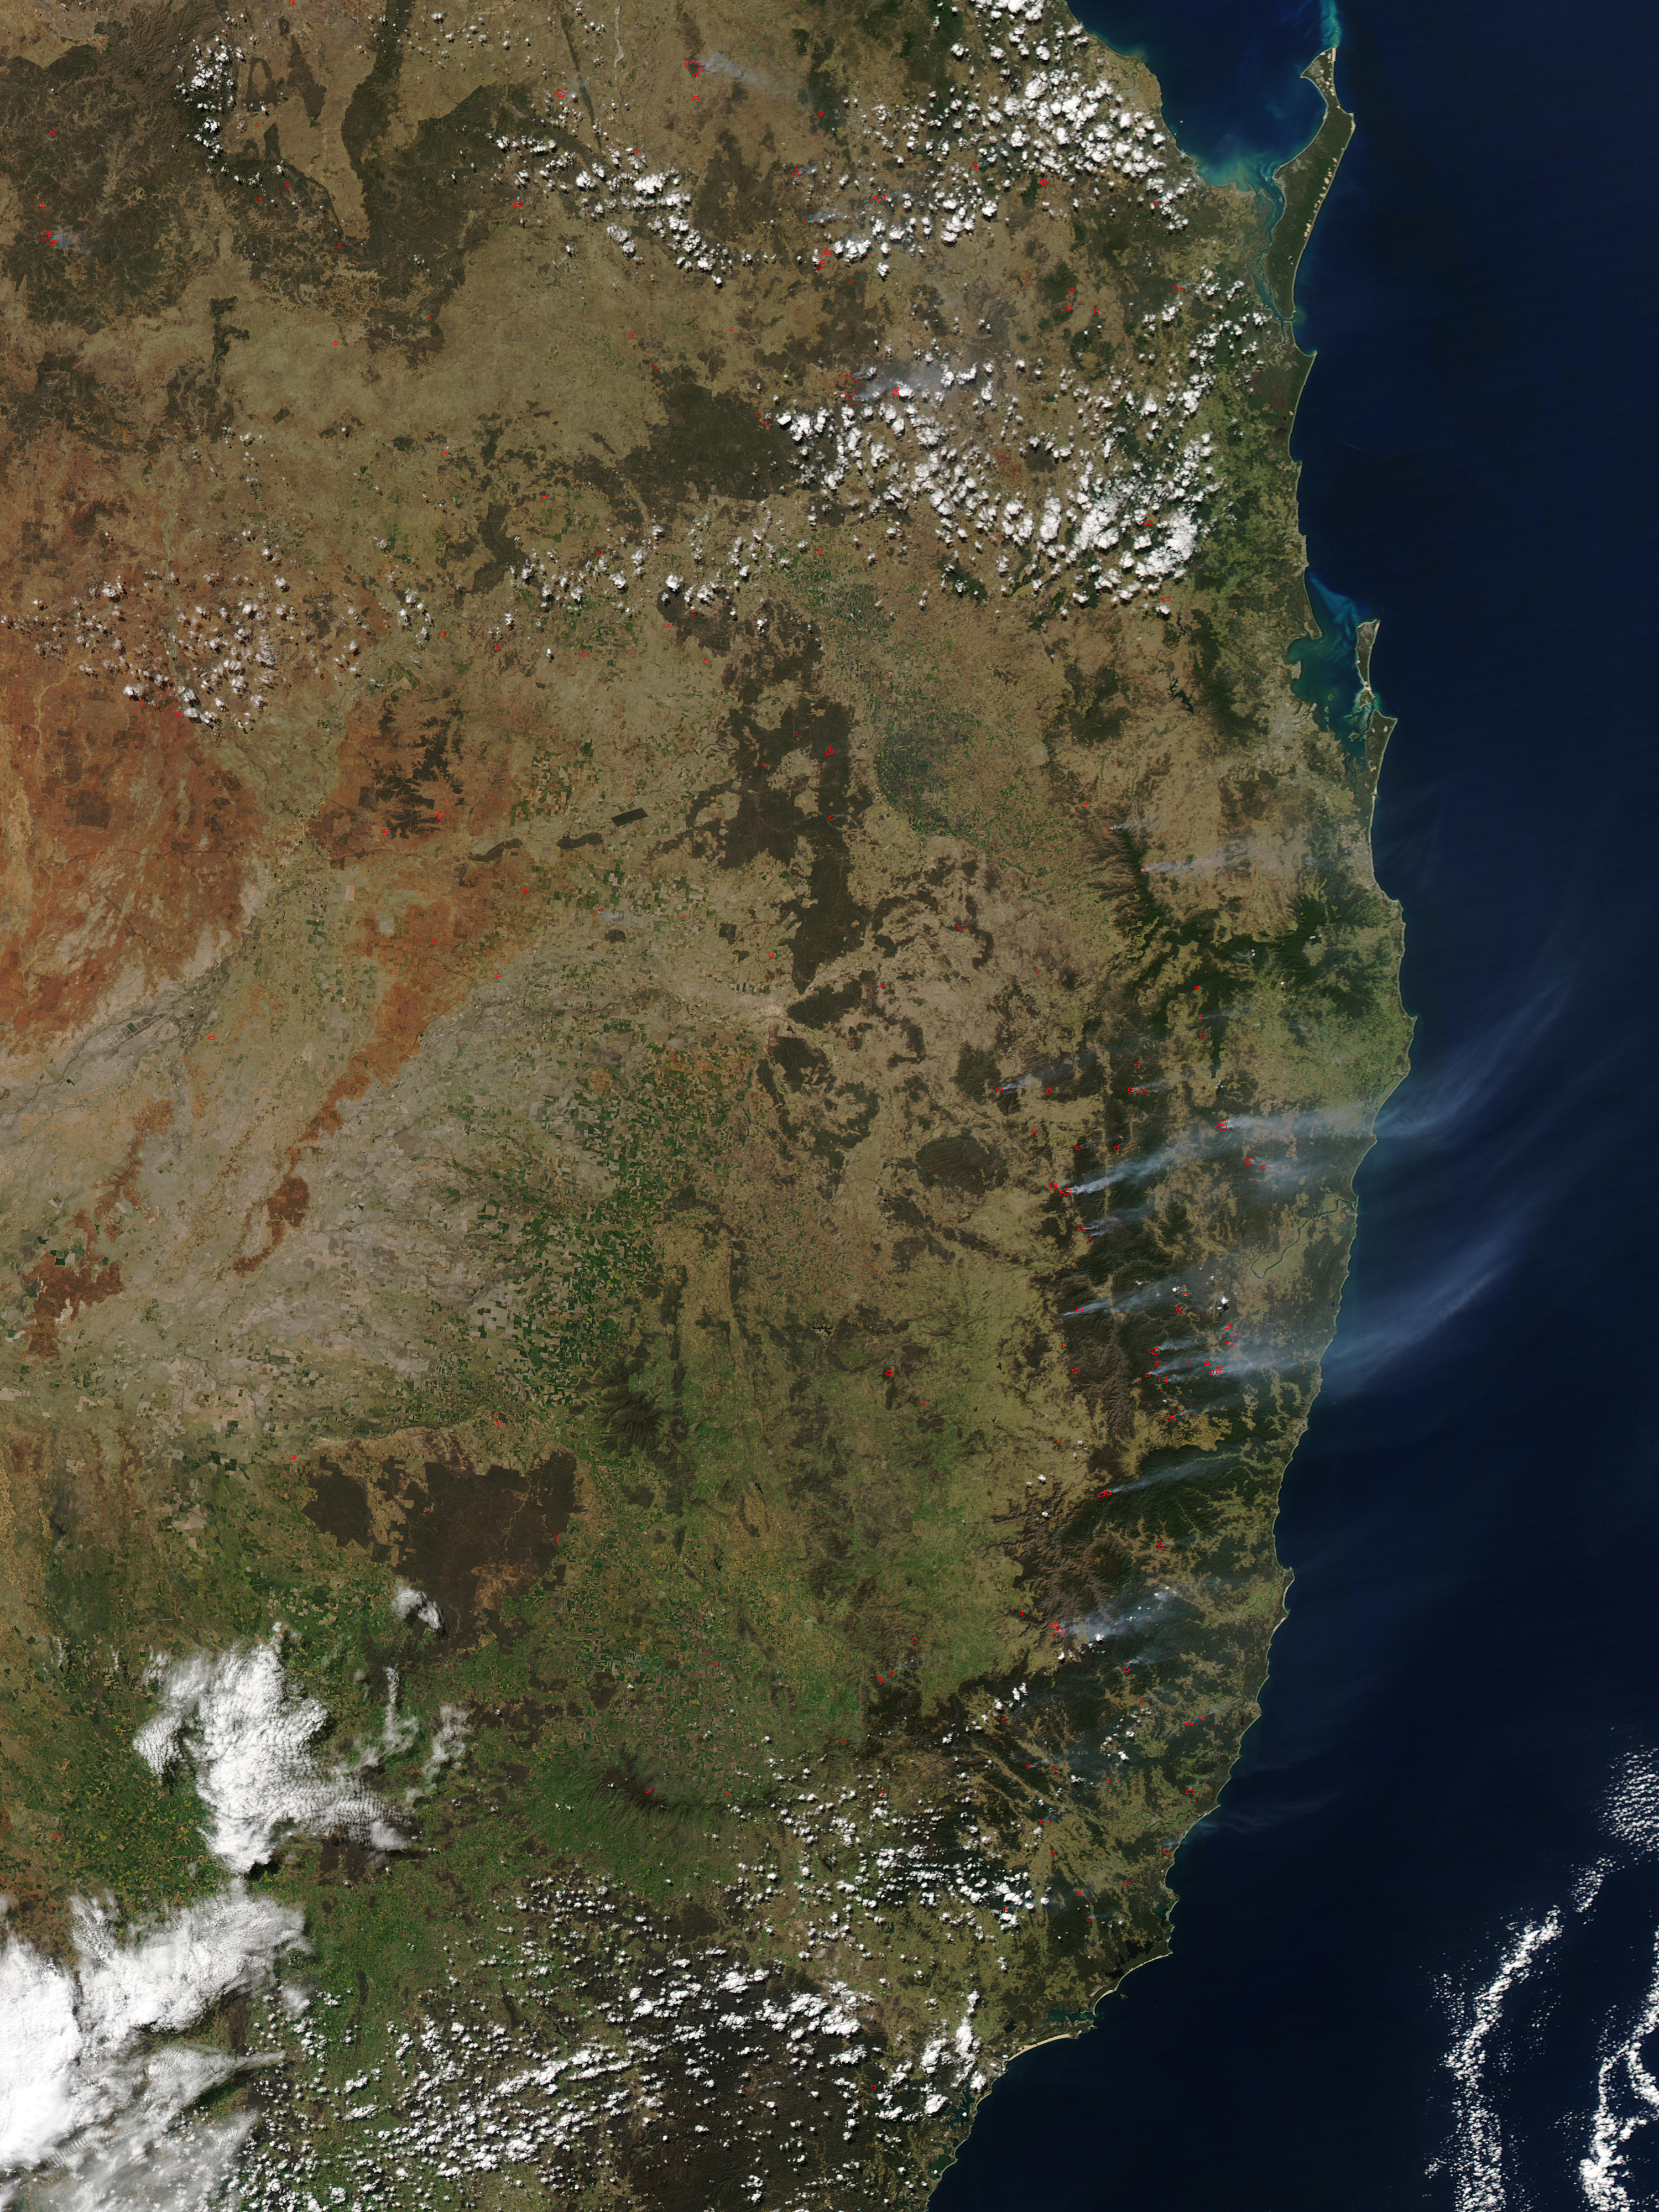 Fires across Australian East Coast - related image preview